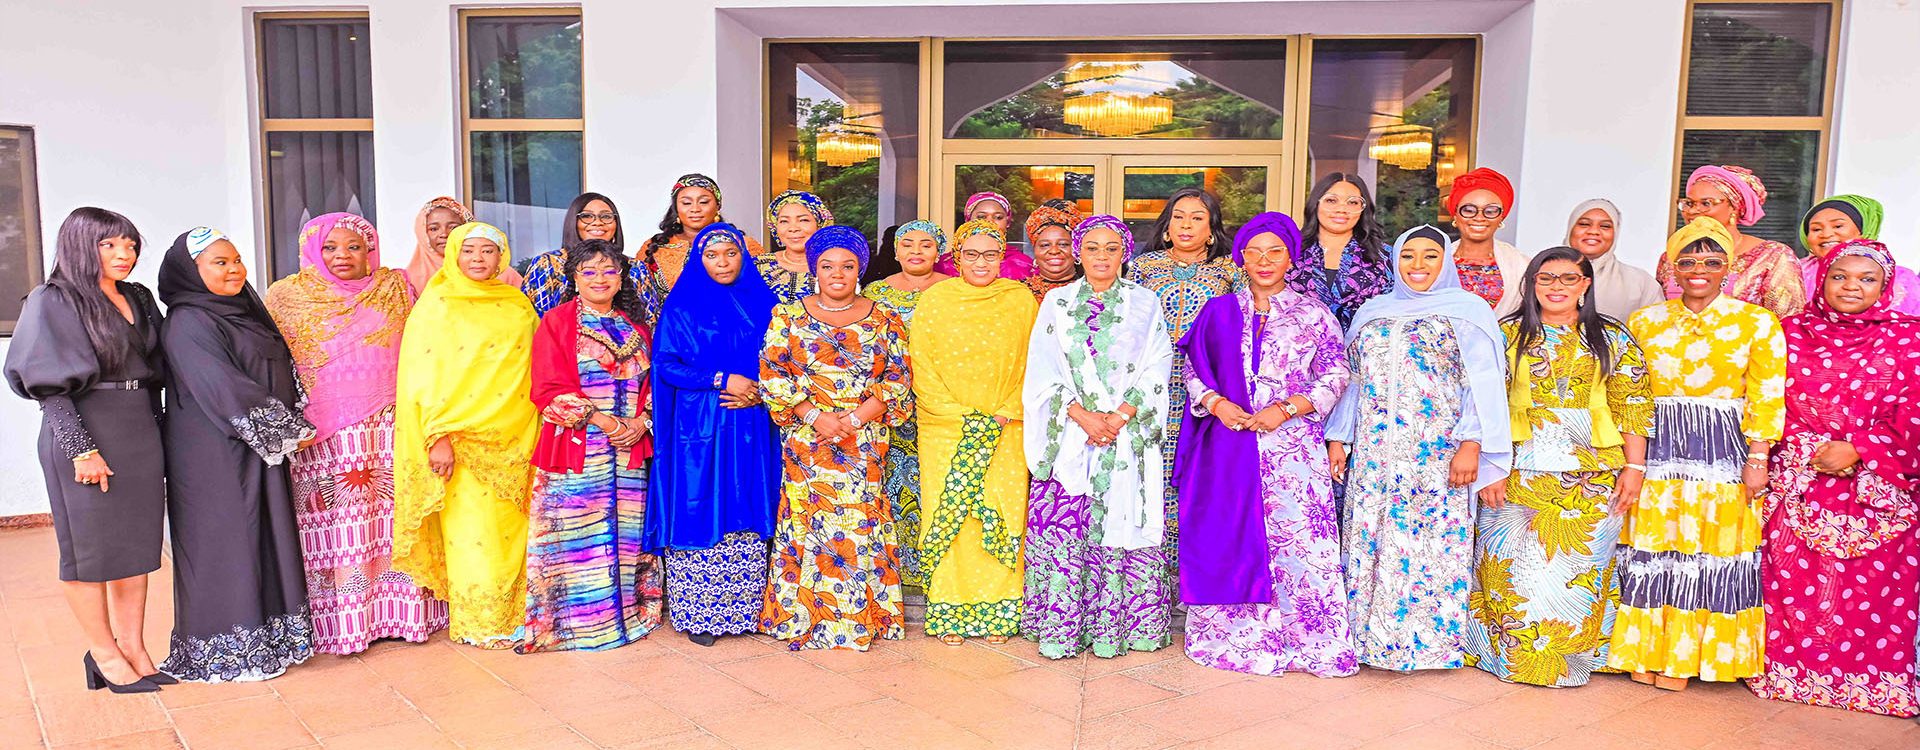 First Lady meets governors’ wives in Abuja over Renewed Hope Initiative project